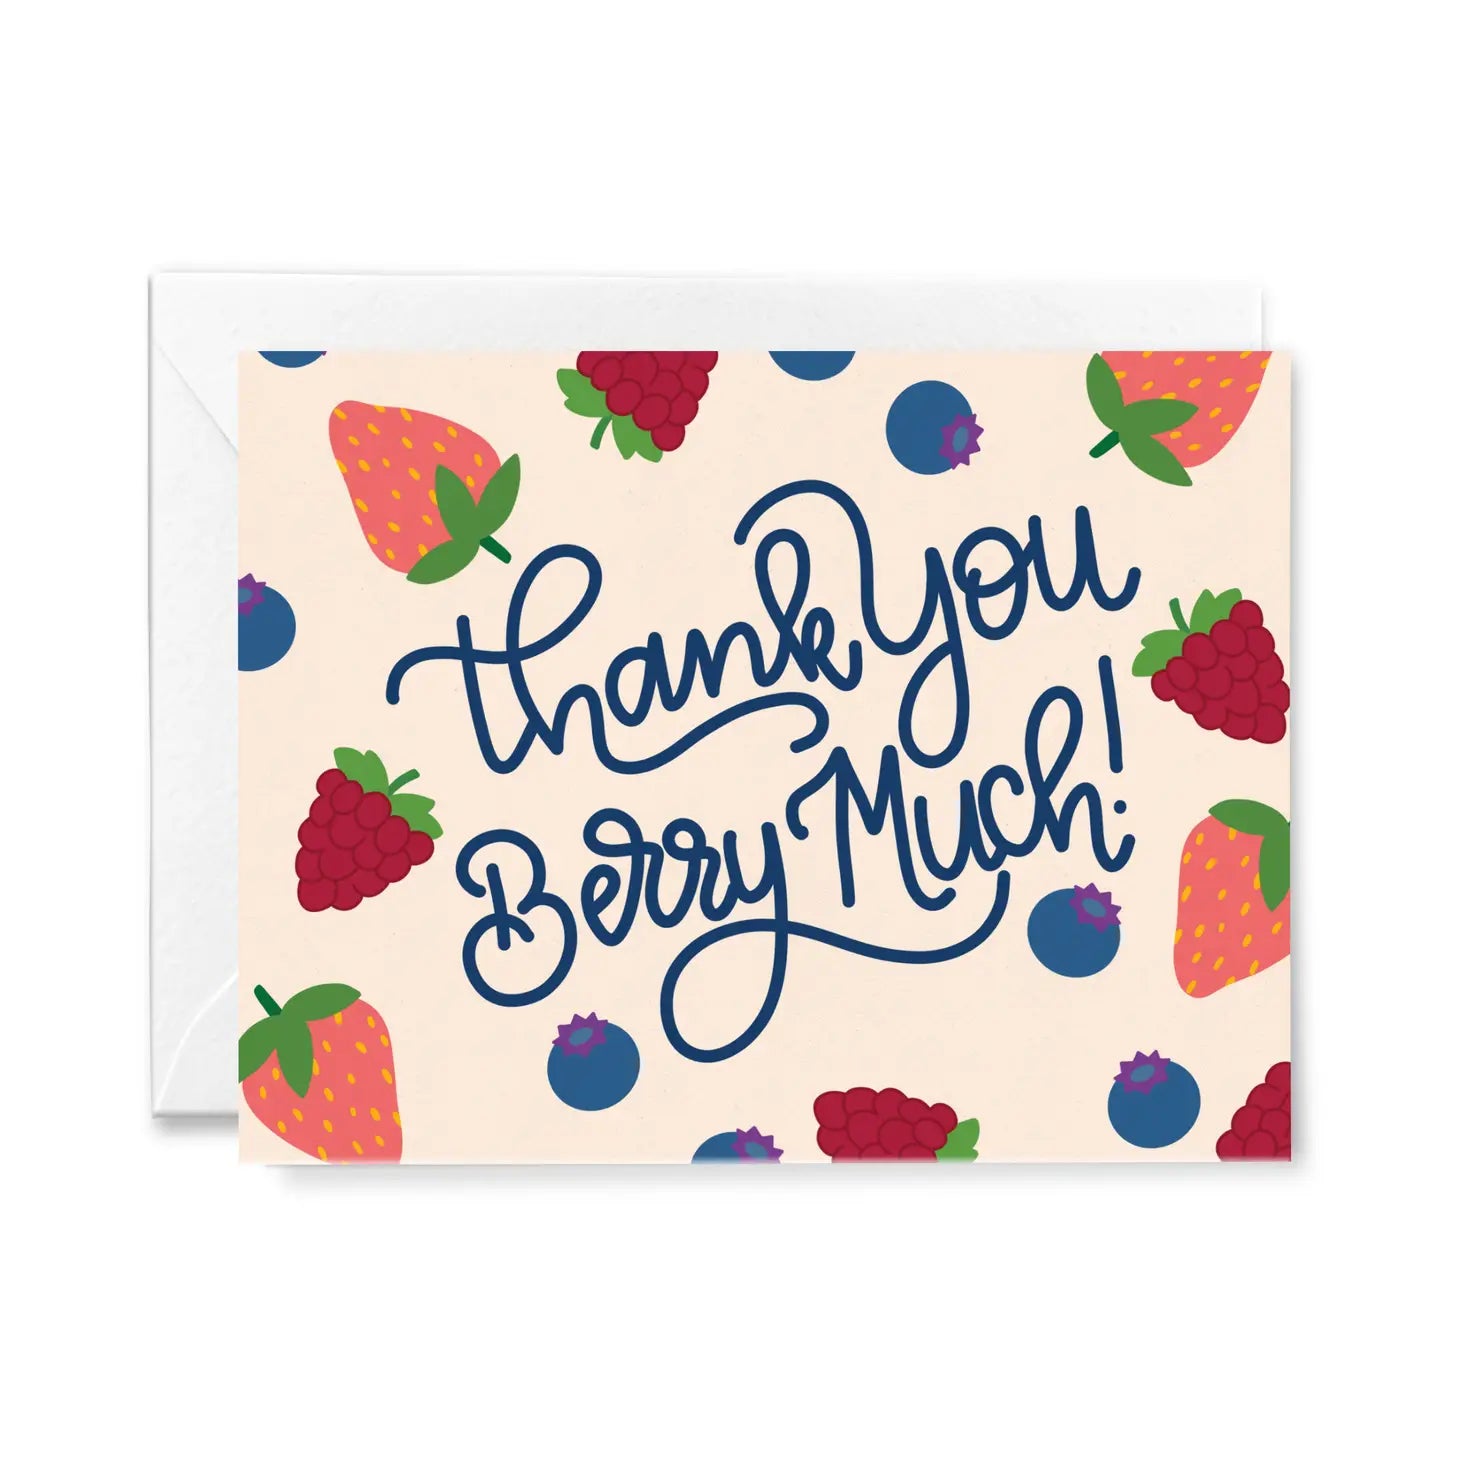 Thank You Berry Much - Greeting Card